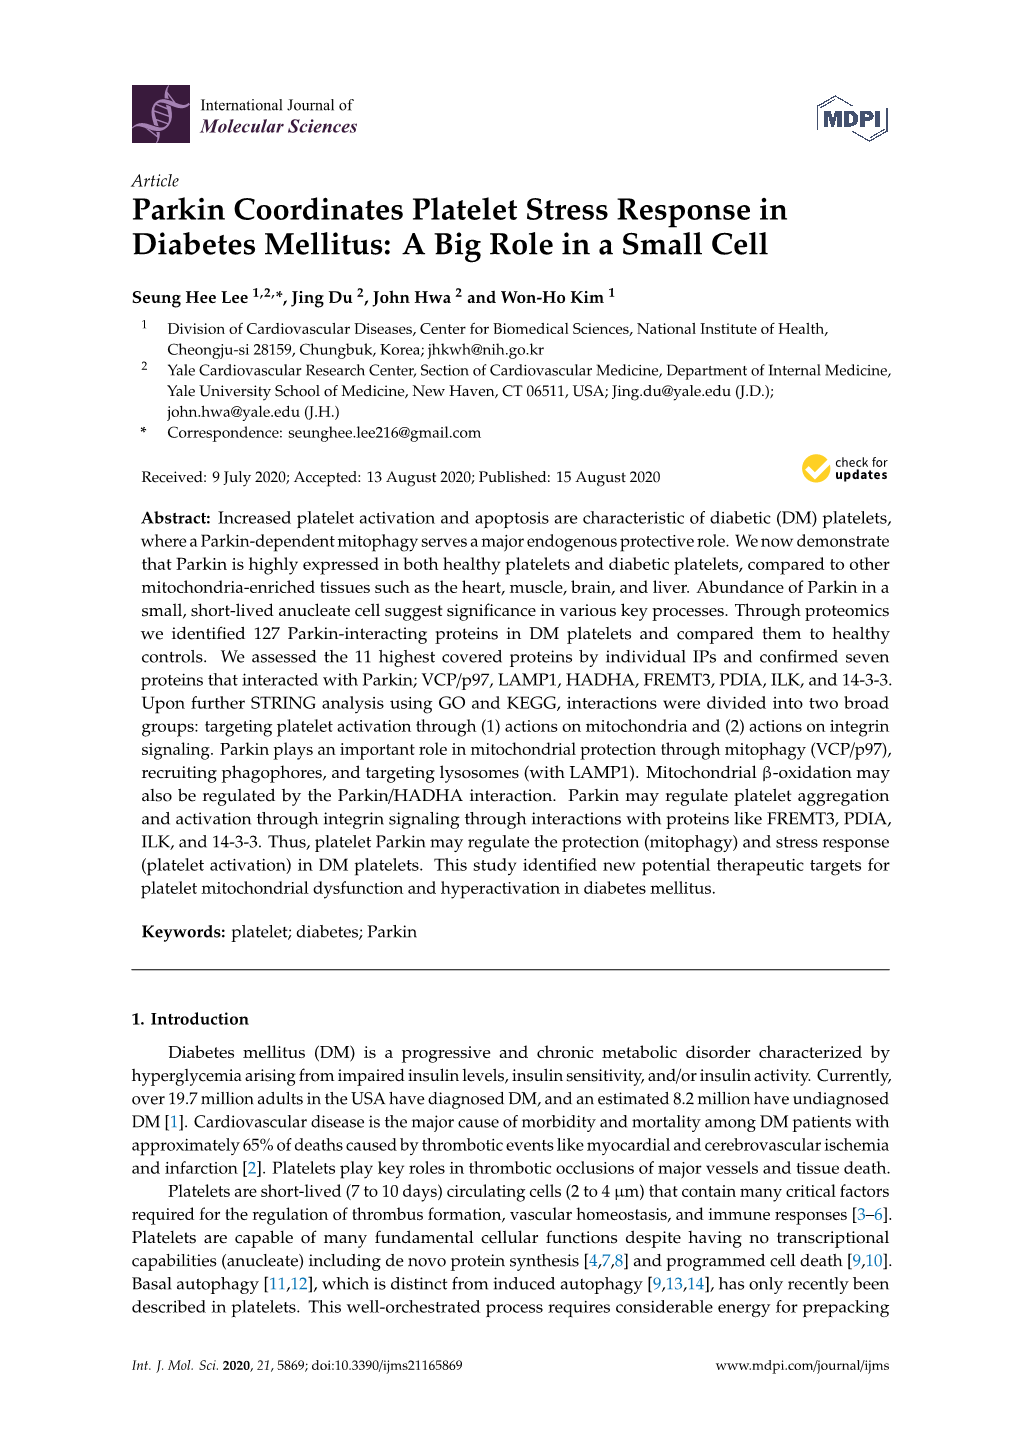 Parkin Coordinates Platelet Stress Response in Diabetes Mellitus: a Big Role in a Small Cell